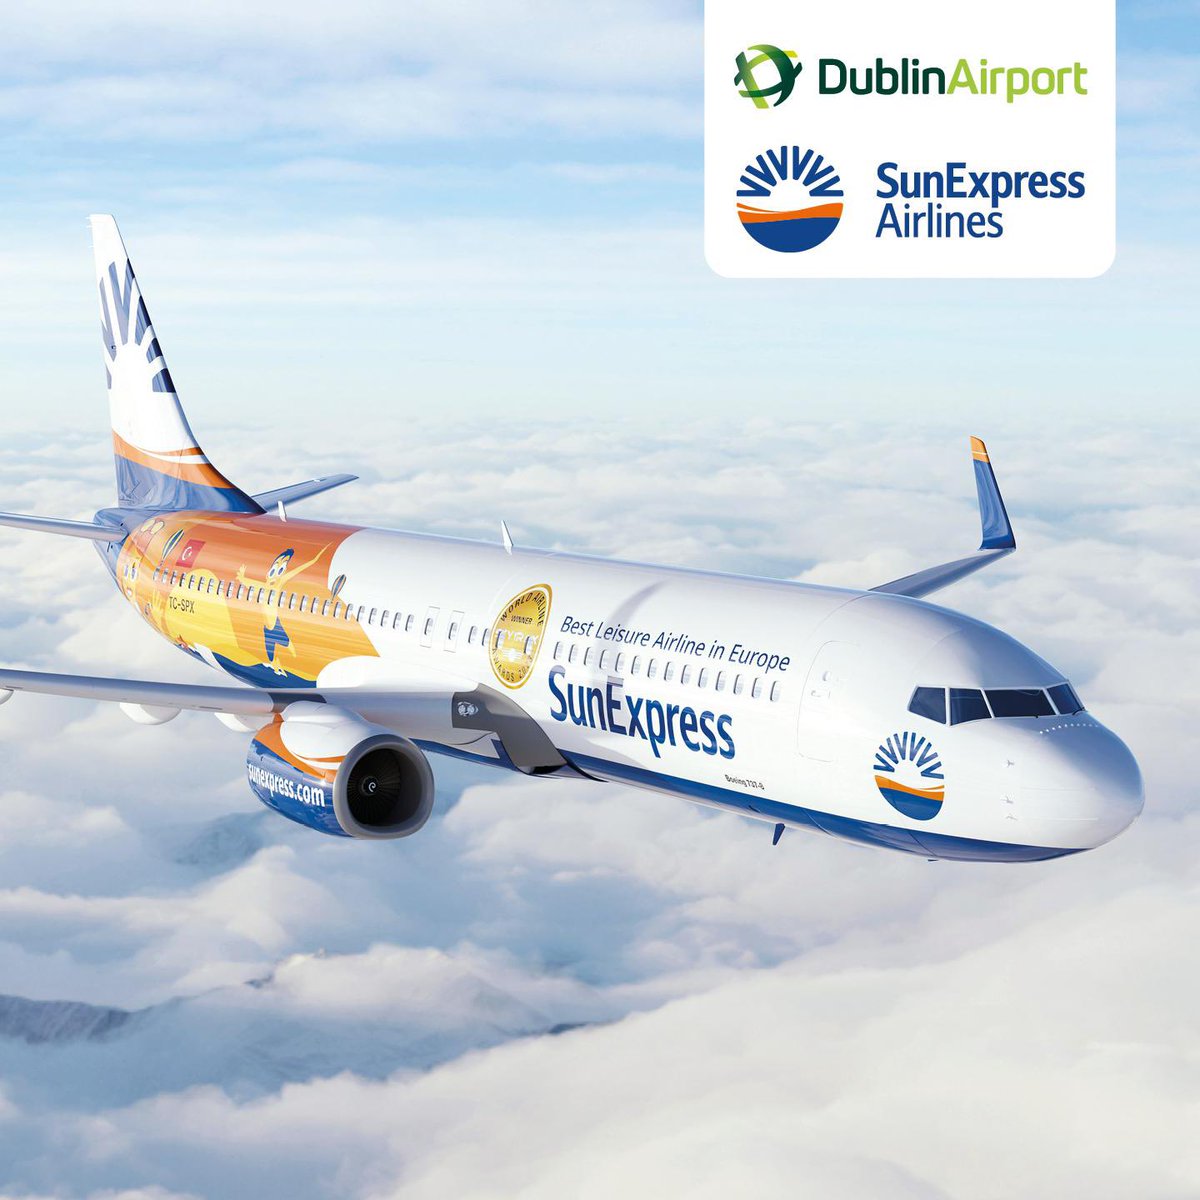 ✈️ We've teamed up with @SunExpress to giveaway return flights for two to Turkey 🇹🇷 ☀️✈️ Turkey offers a blend of culture, history, & natural beauty that captivates visitors from around the globe. To enter: FOLLOW & REPOST Good luck 🤞 Details: dublinairport.com/latest-news/20…